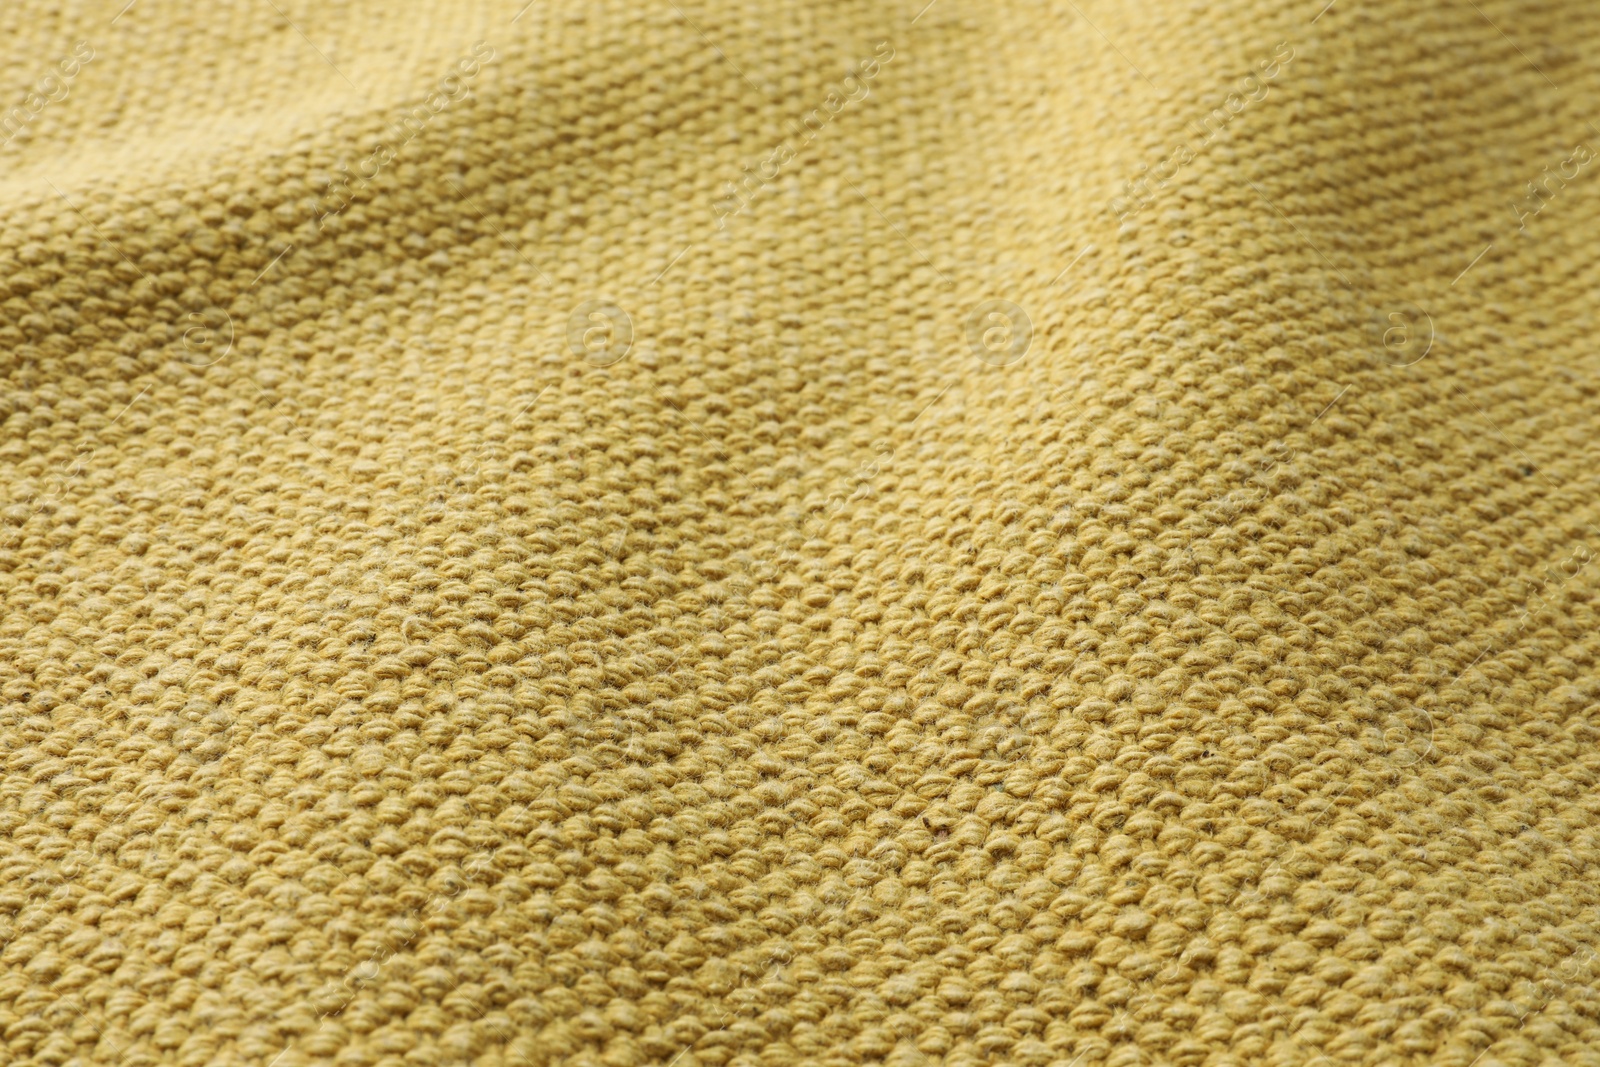 Photo of Texture of golden color fabric as background, closeup